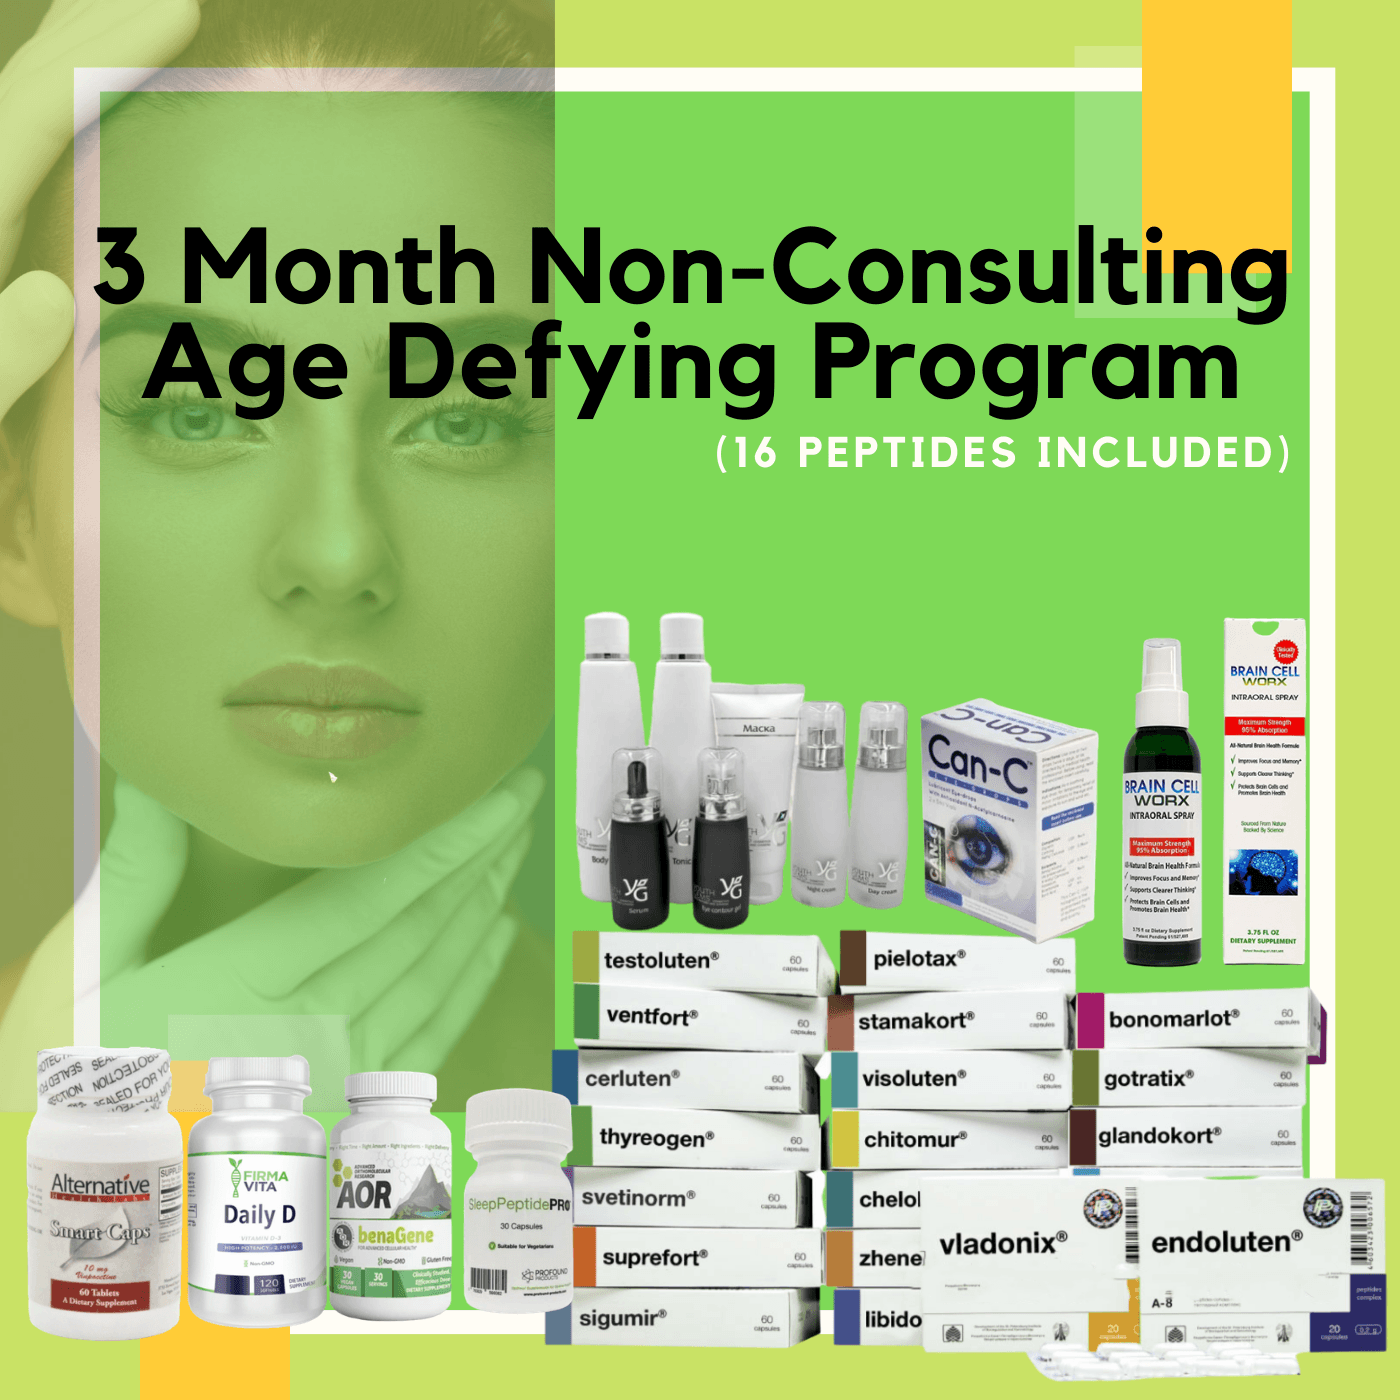 Highway to Health - 3 Month Non-Consulting Age Defying Program (16 Peptides Included)